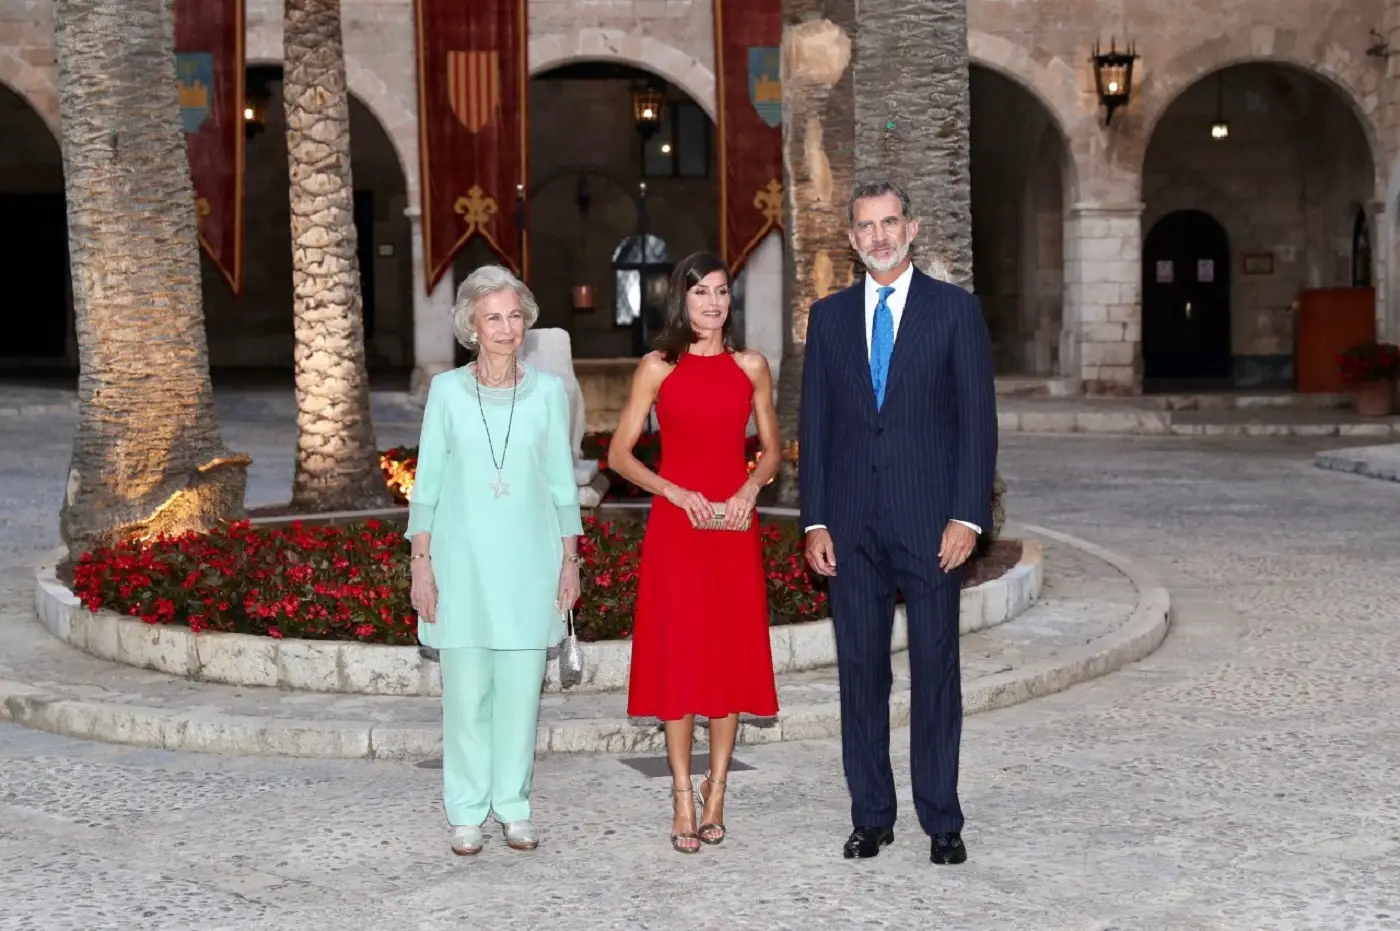 The year 2019 saw Queen Letizia in stunning red for Balearic Island Annual Reception. The reception was cancelled in 2020 and 2021 due to the pandemic.